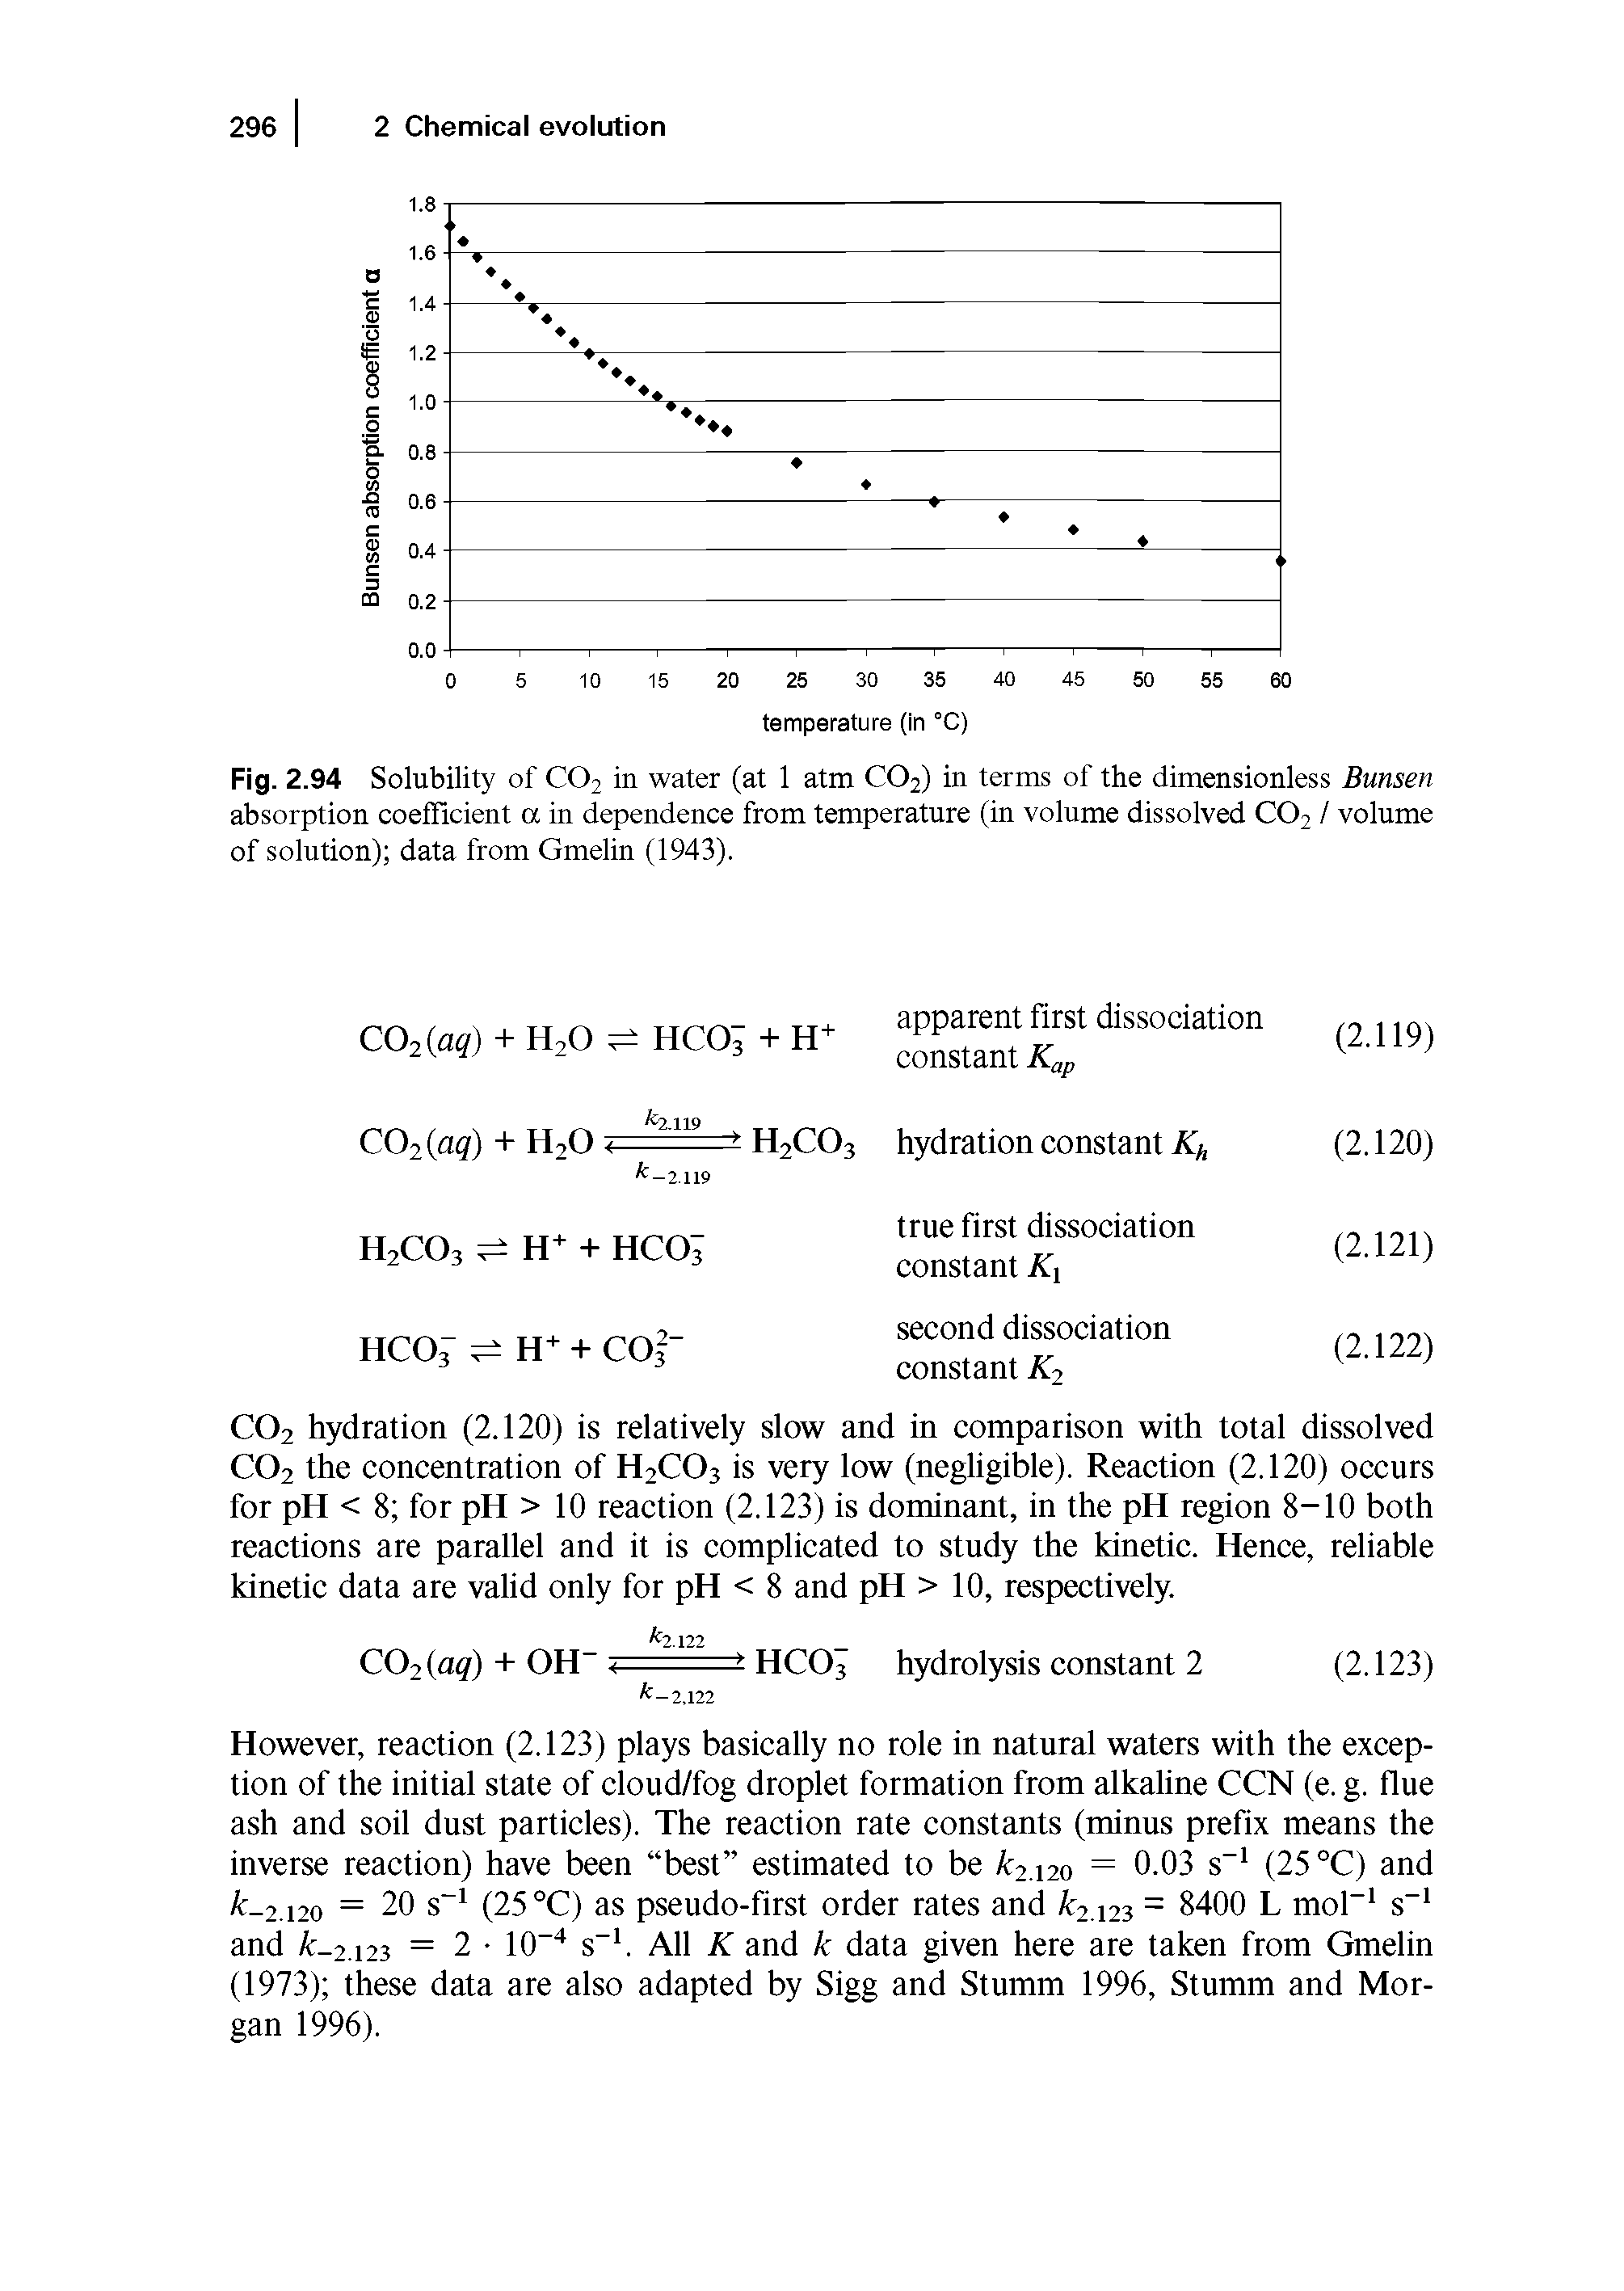 Fig. 2.94 Solubility of CO2 in water (at 1 atm CO2) in terms of the dimensionless Bunsen absorption coefficient a in dependence from temperature (in volume dissolved CO2 / volume of solution) data from Gmelin (1943).